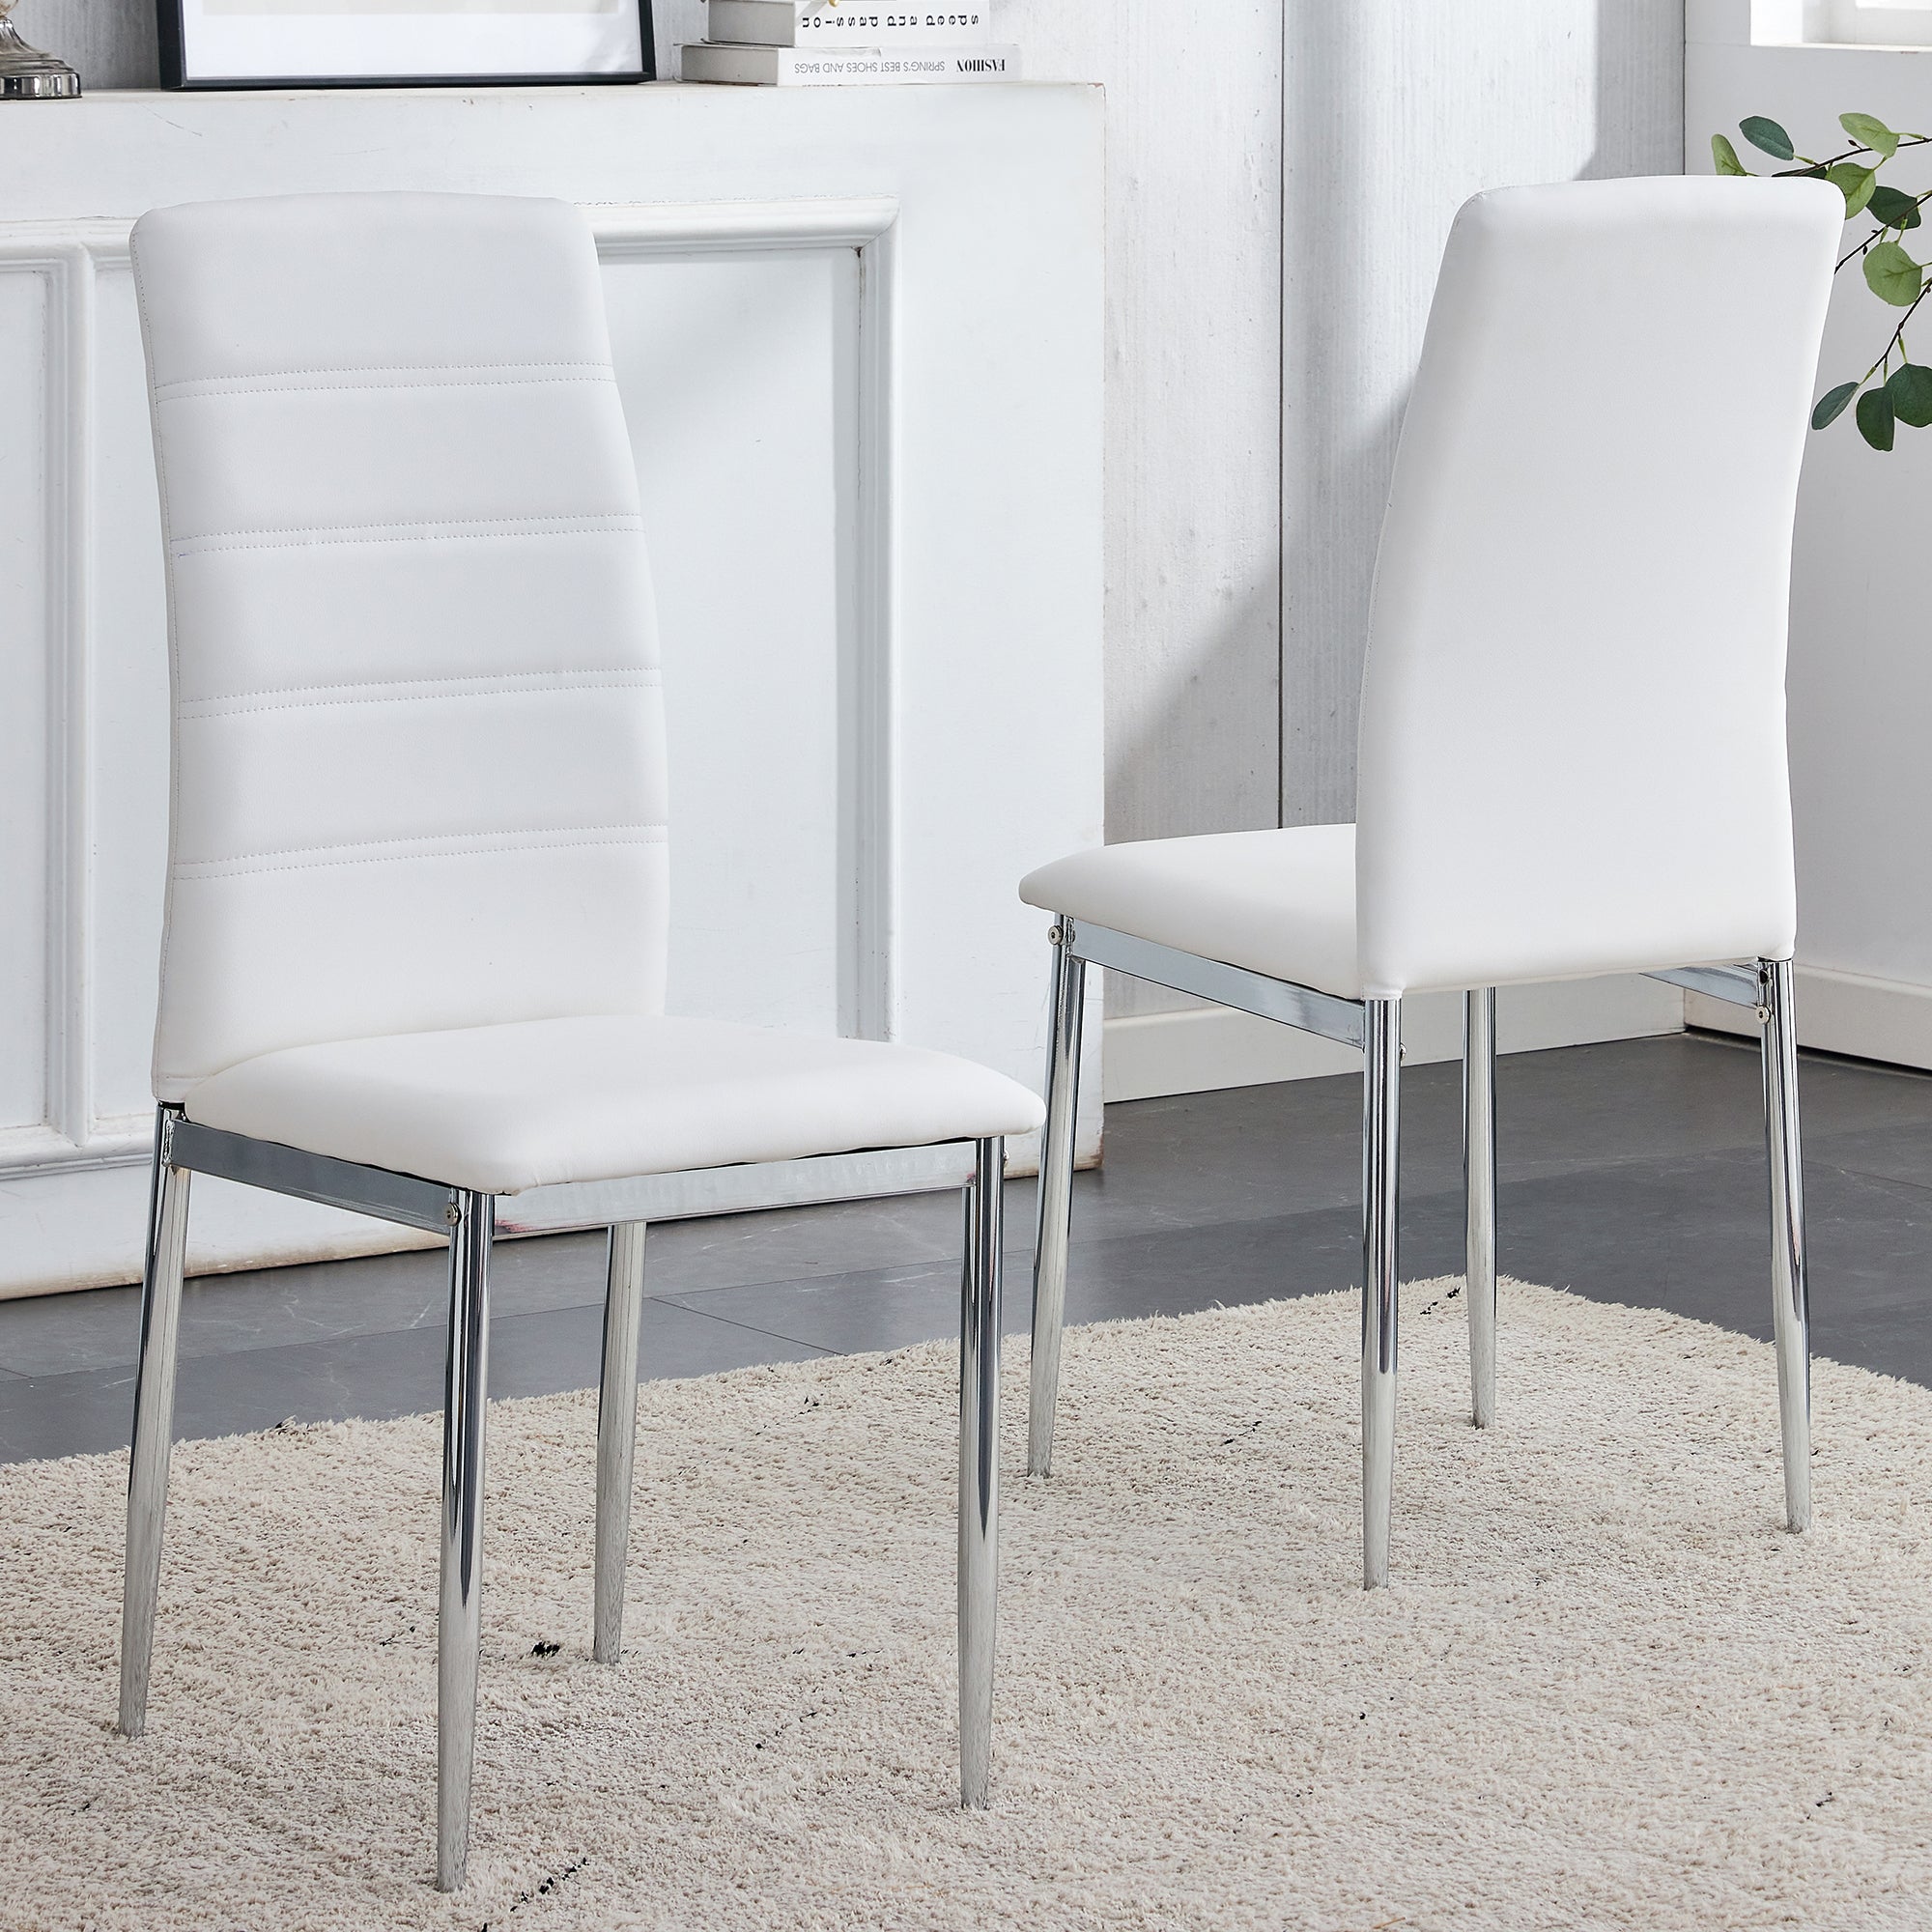 Set of 4 Pieces White Faux leather Dining Chair with Chromed Metal legs